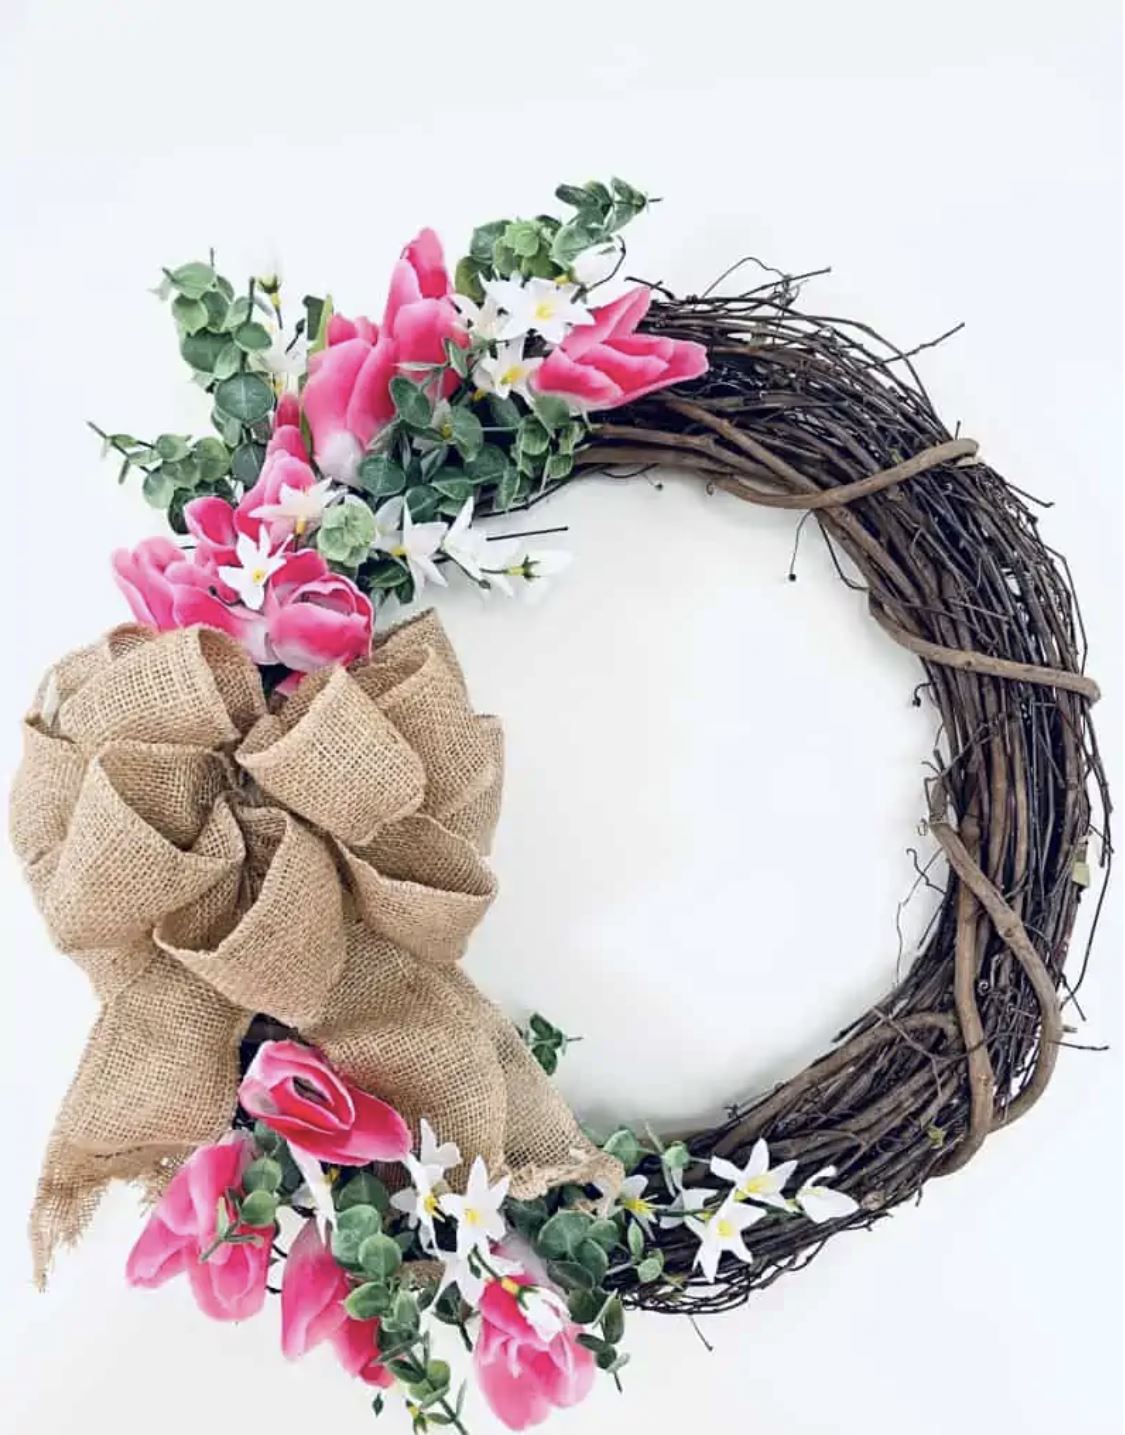 A grapevine wreath with a burlap bow and pink flowers.